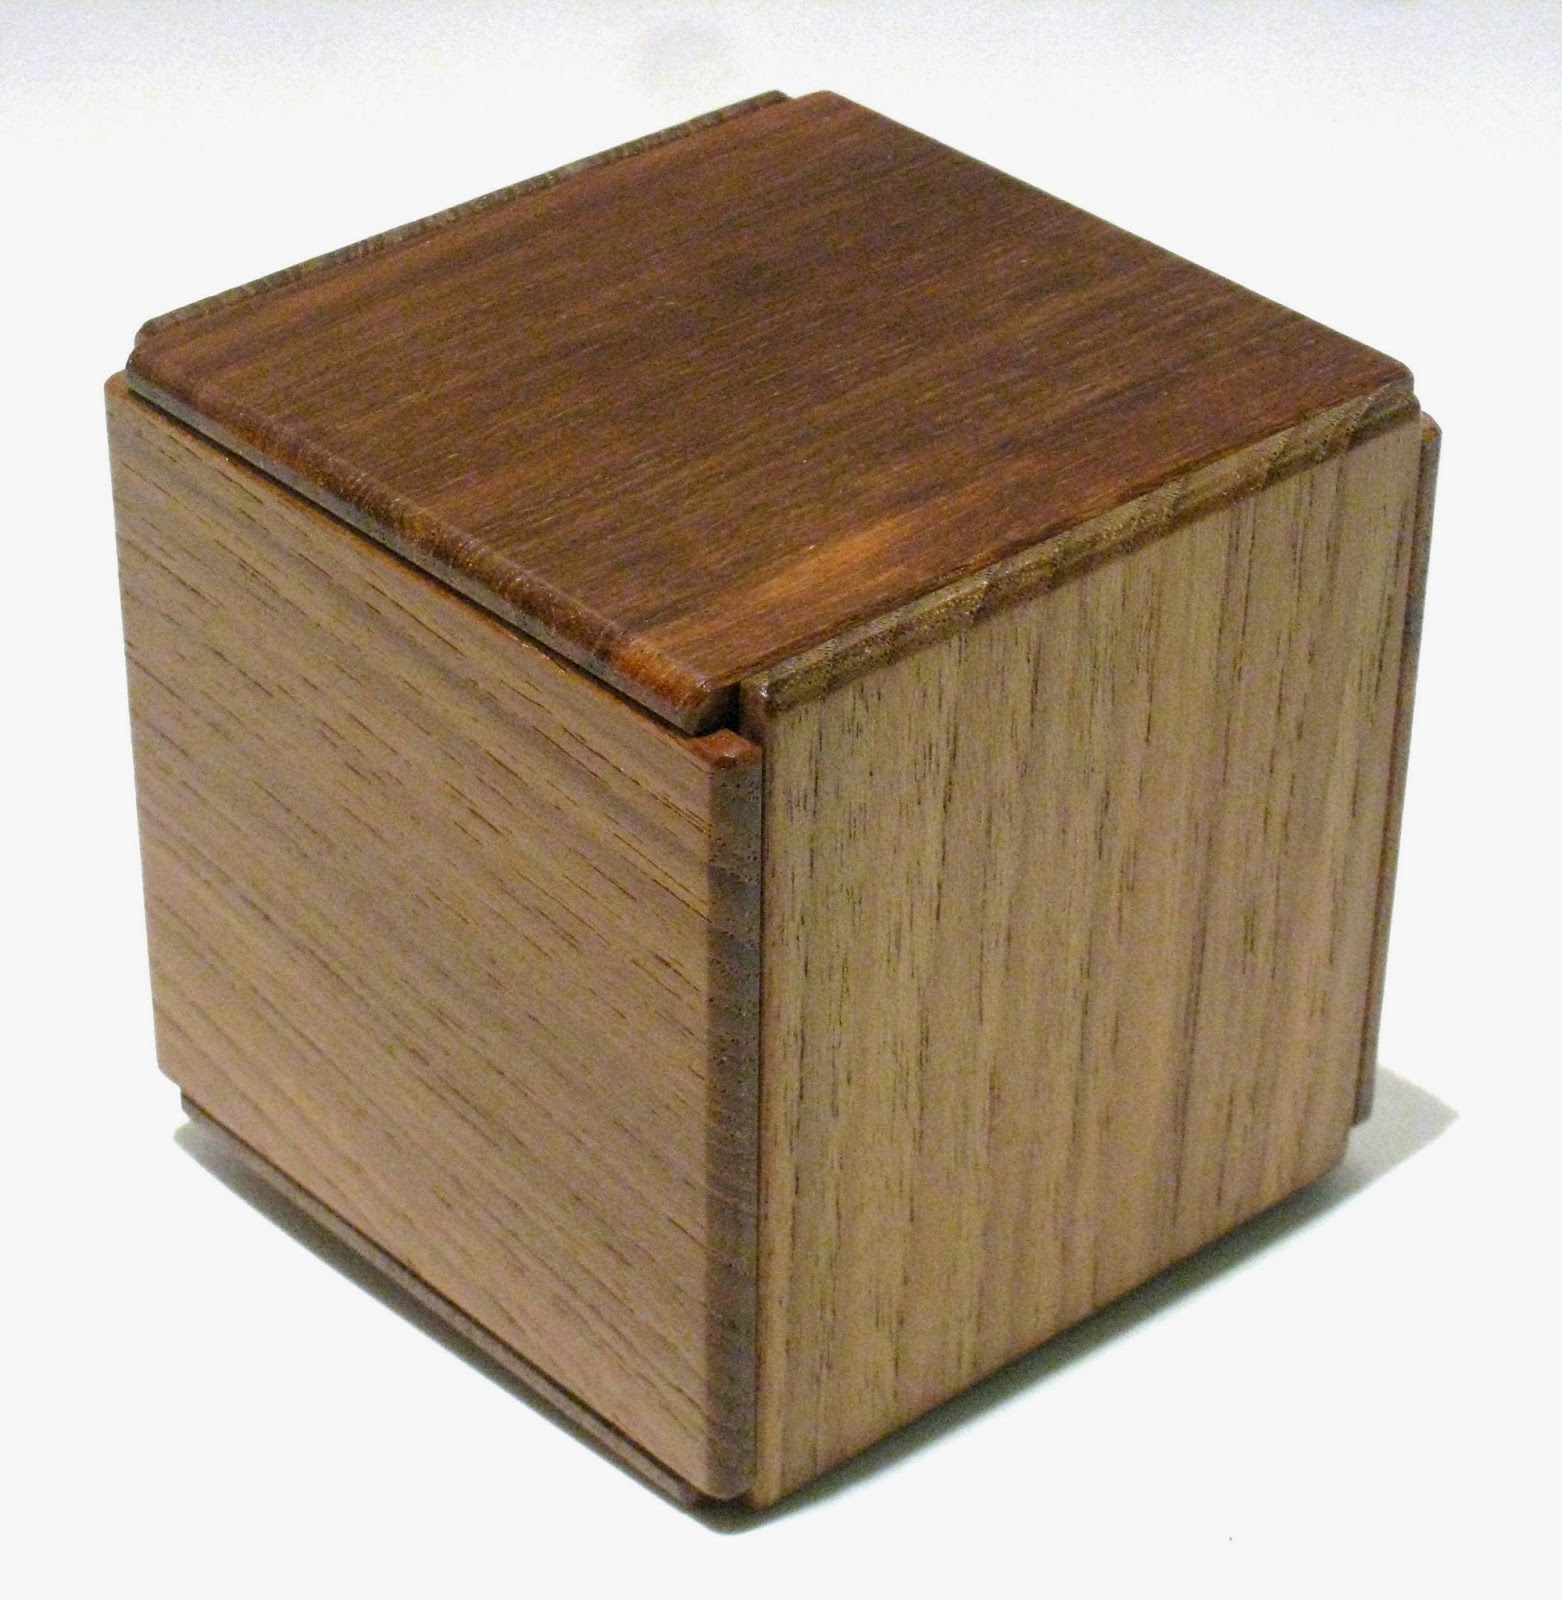 This puzzle box was designed and made by Hiroshi Iwahara from the 